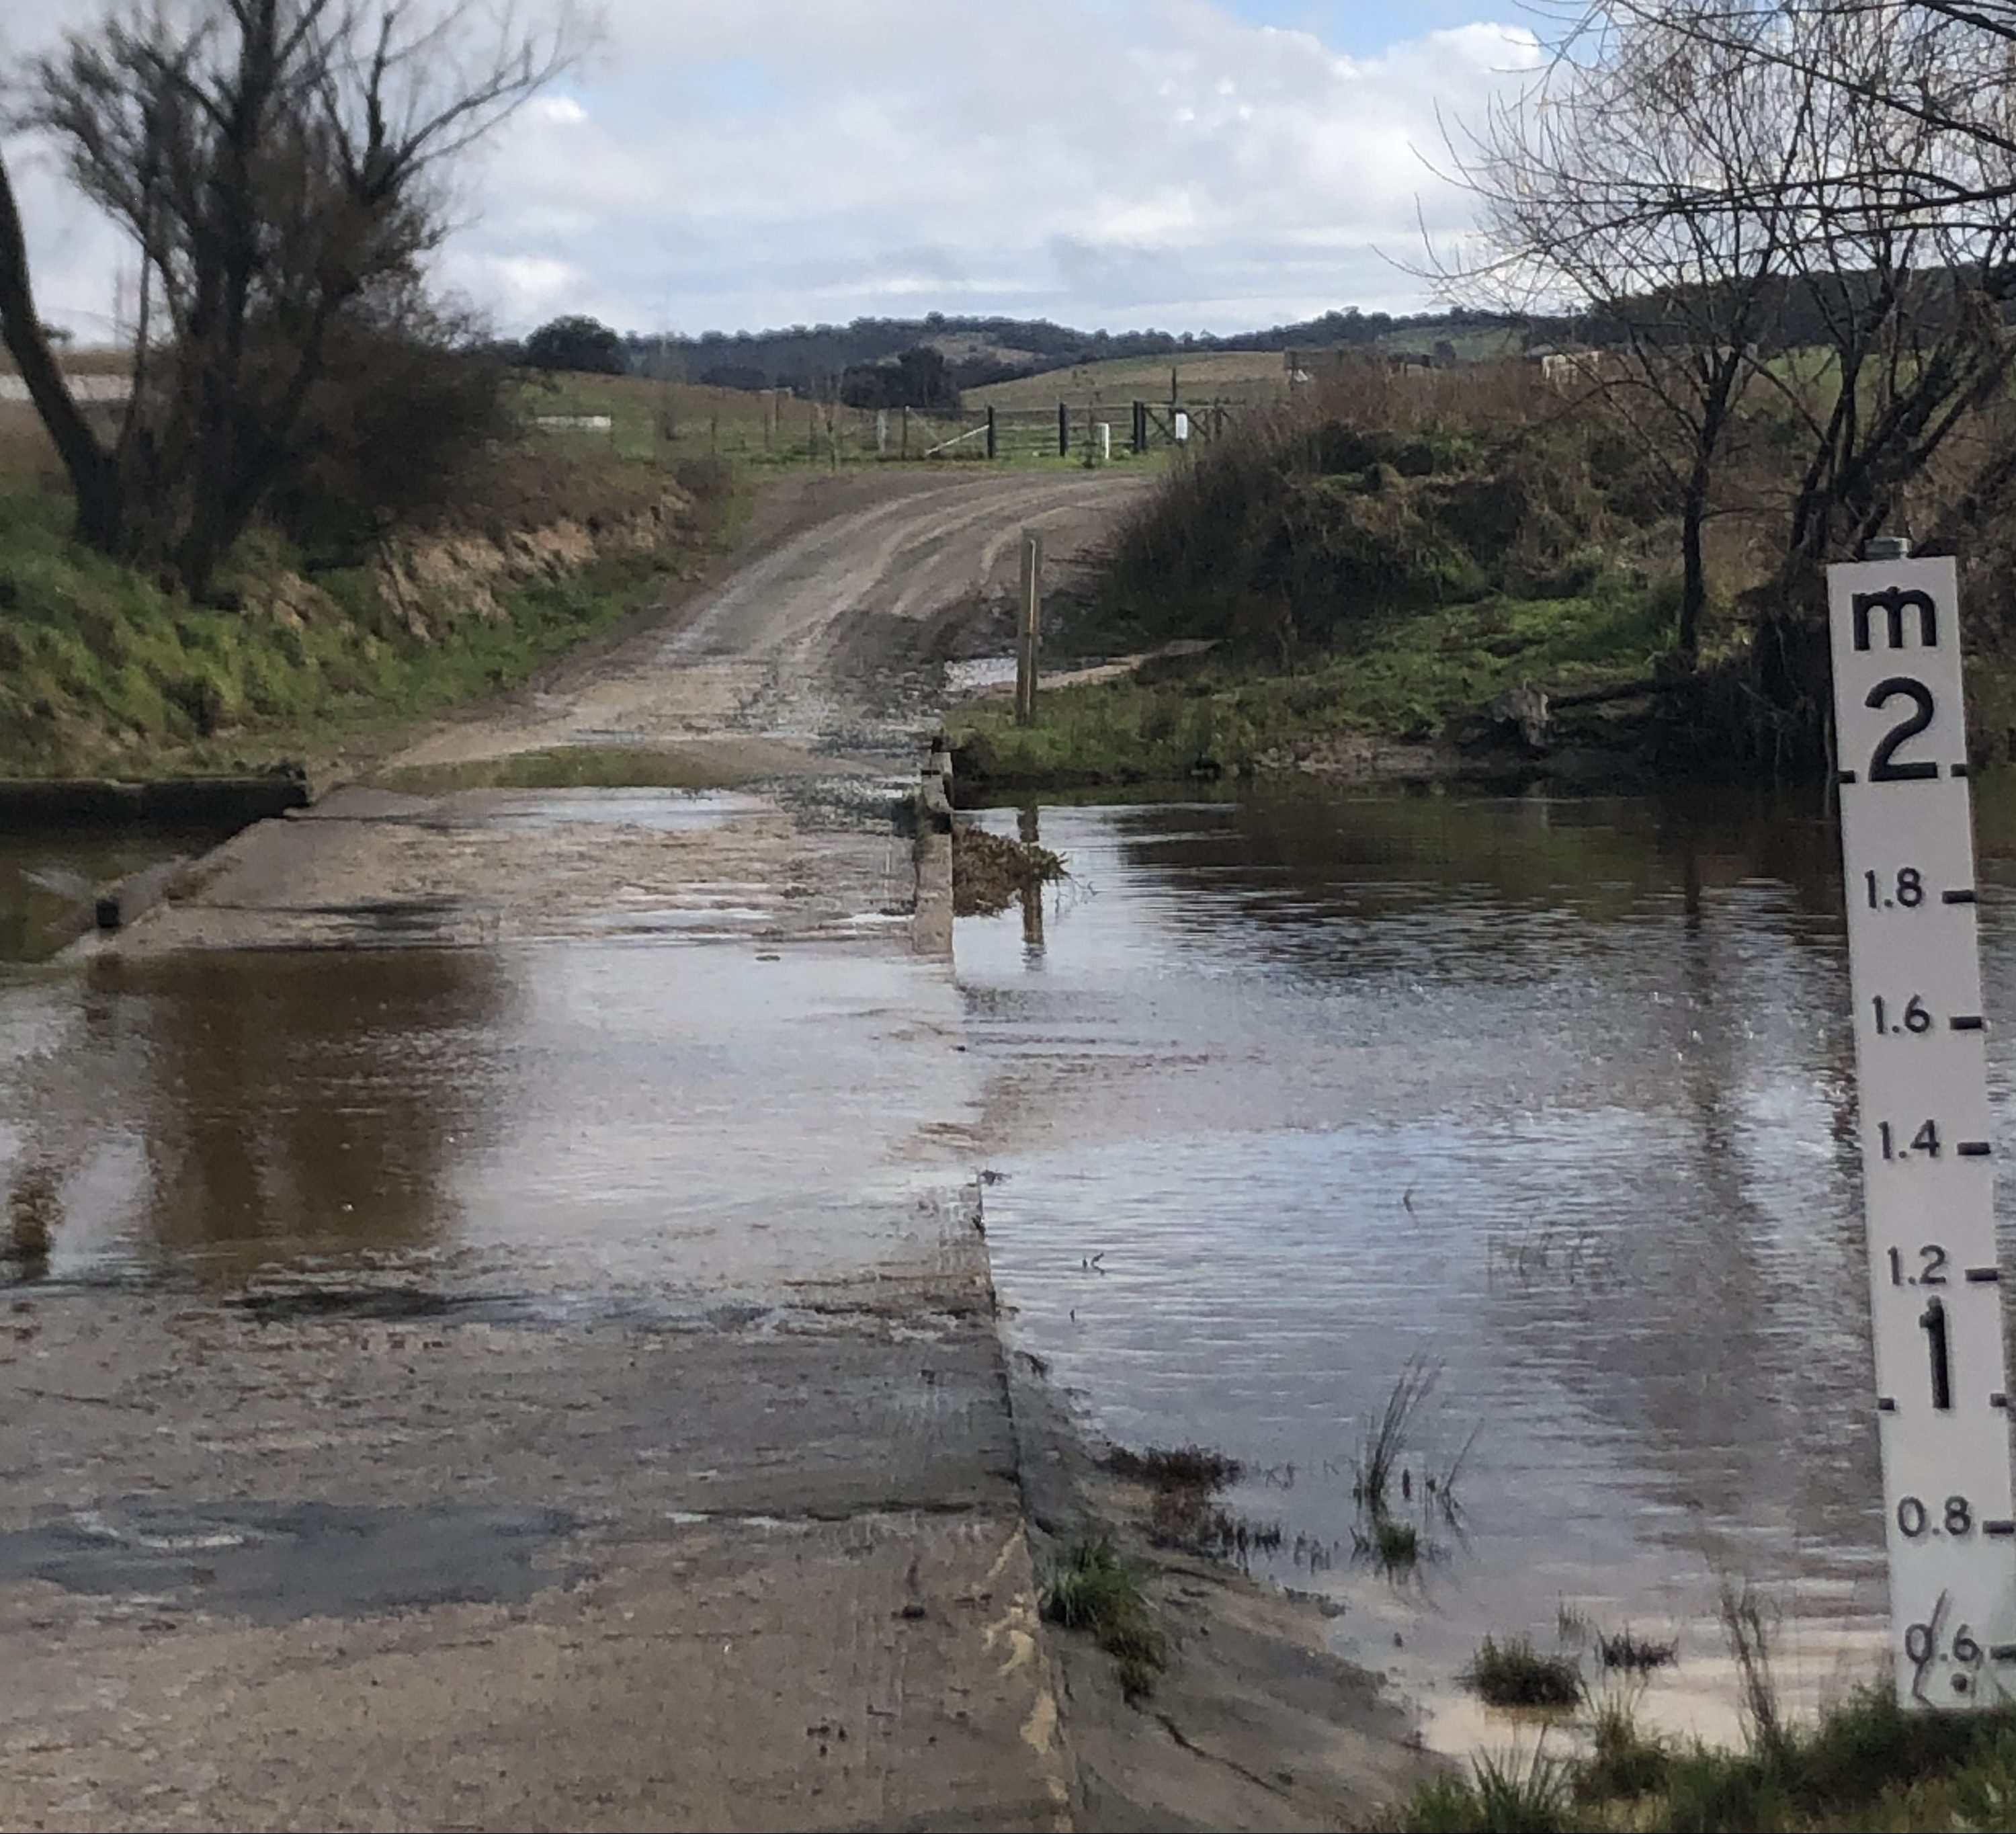 Yass community to benefit from $3.5m new road funds